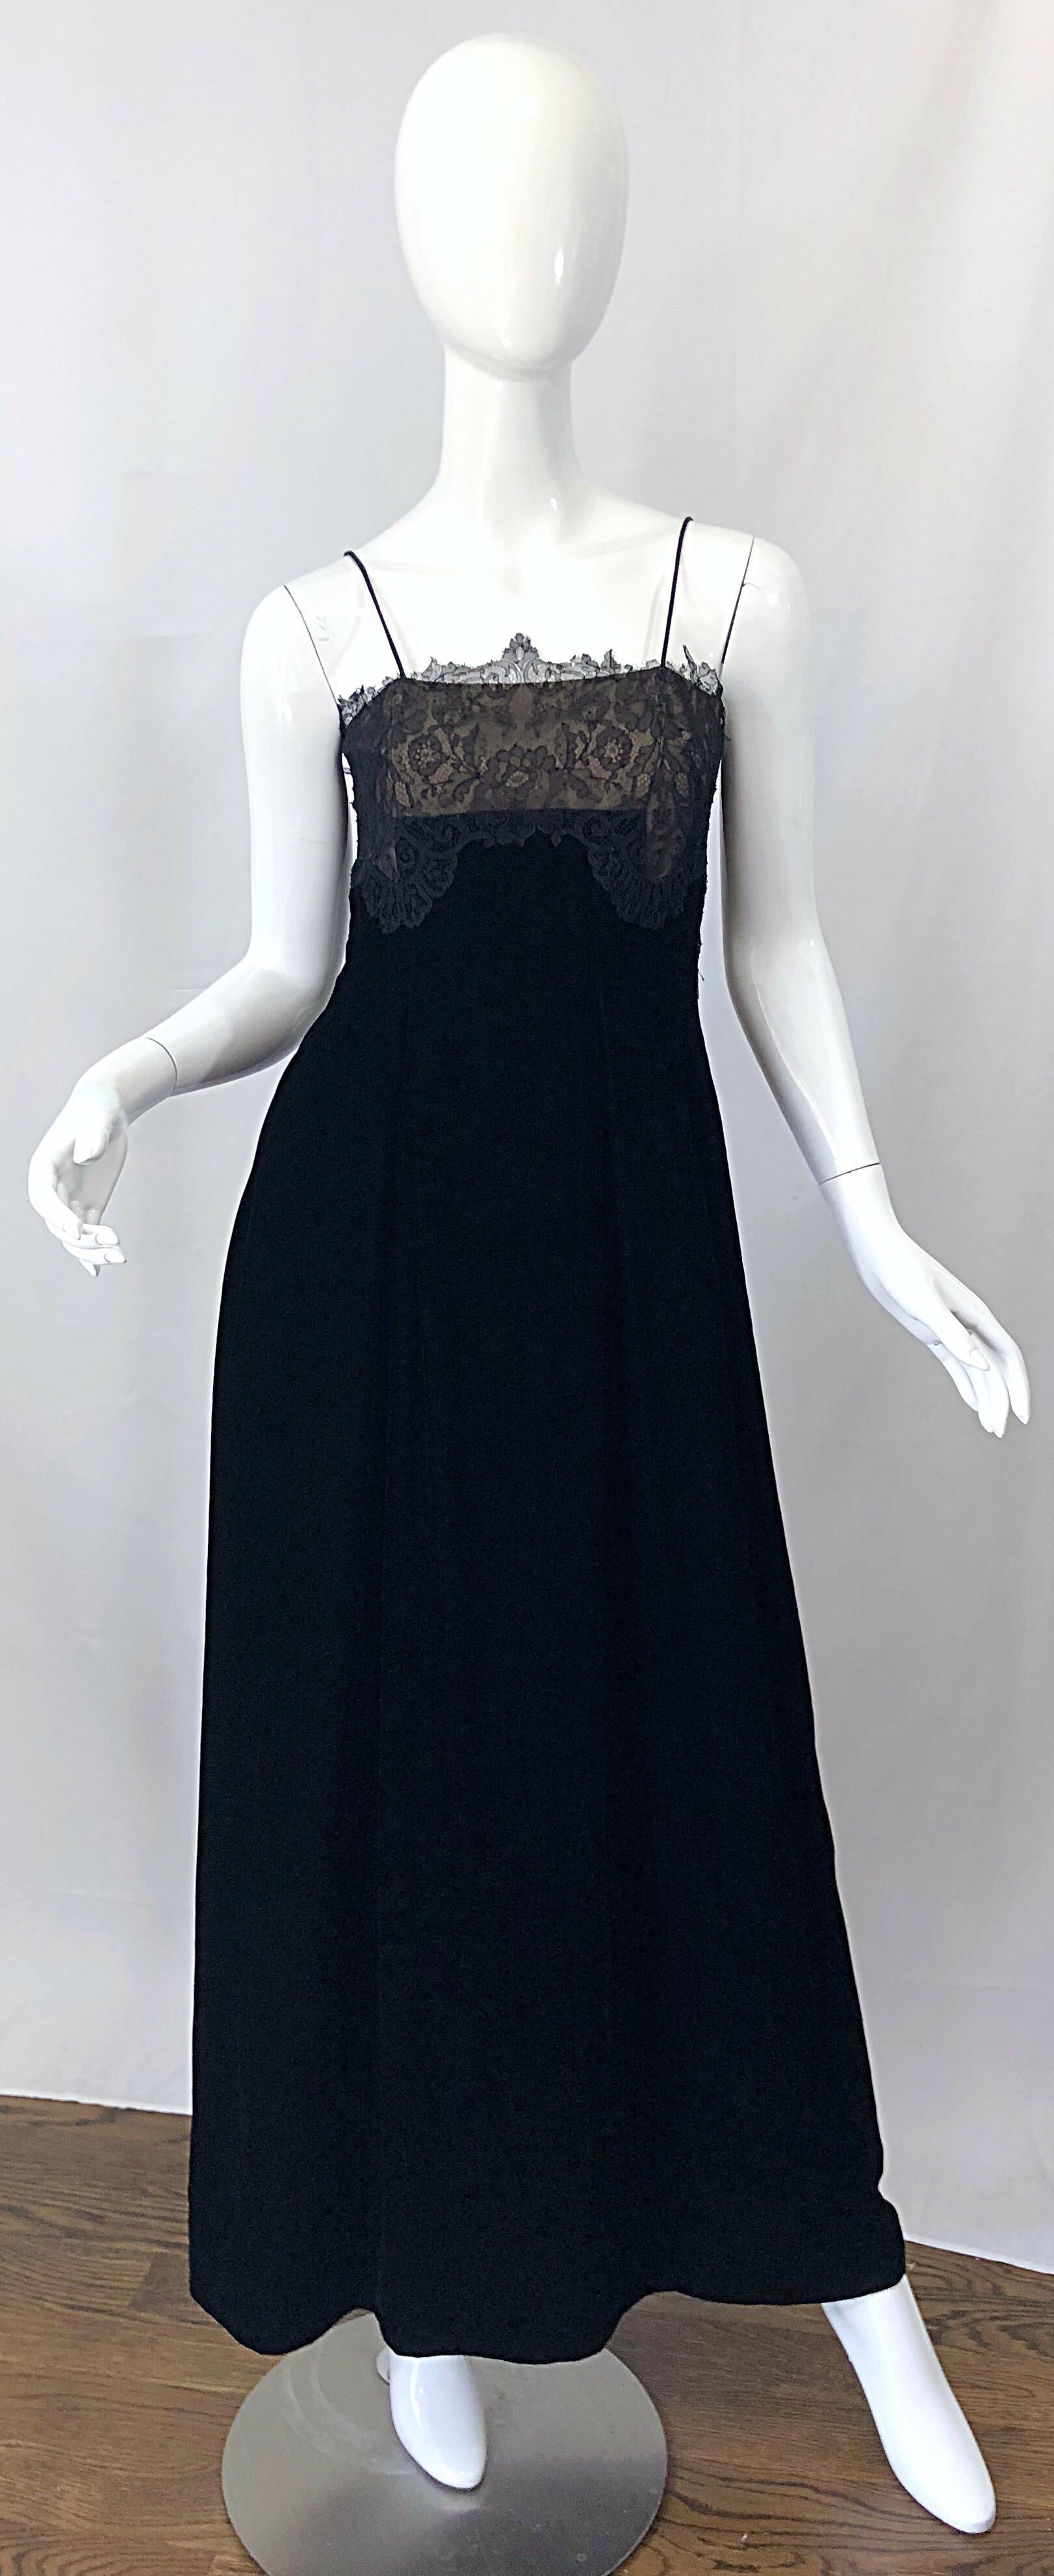 Beautiful late 70s RICHILENE for NEIMAN MARCUS black silk velvet and nude lace chiffon full length evening dress! Couture quality was my first impression upon inspecting this beauty. Inner boned bodice keeps everything in place. Luxurious black silk